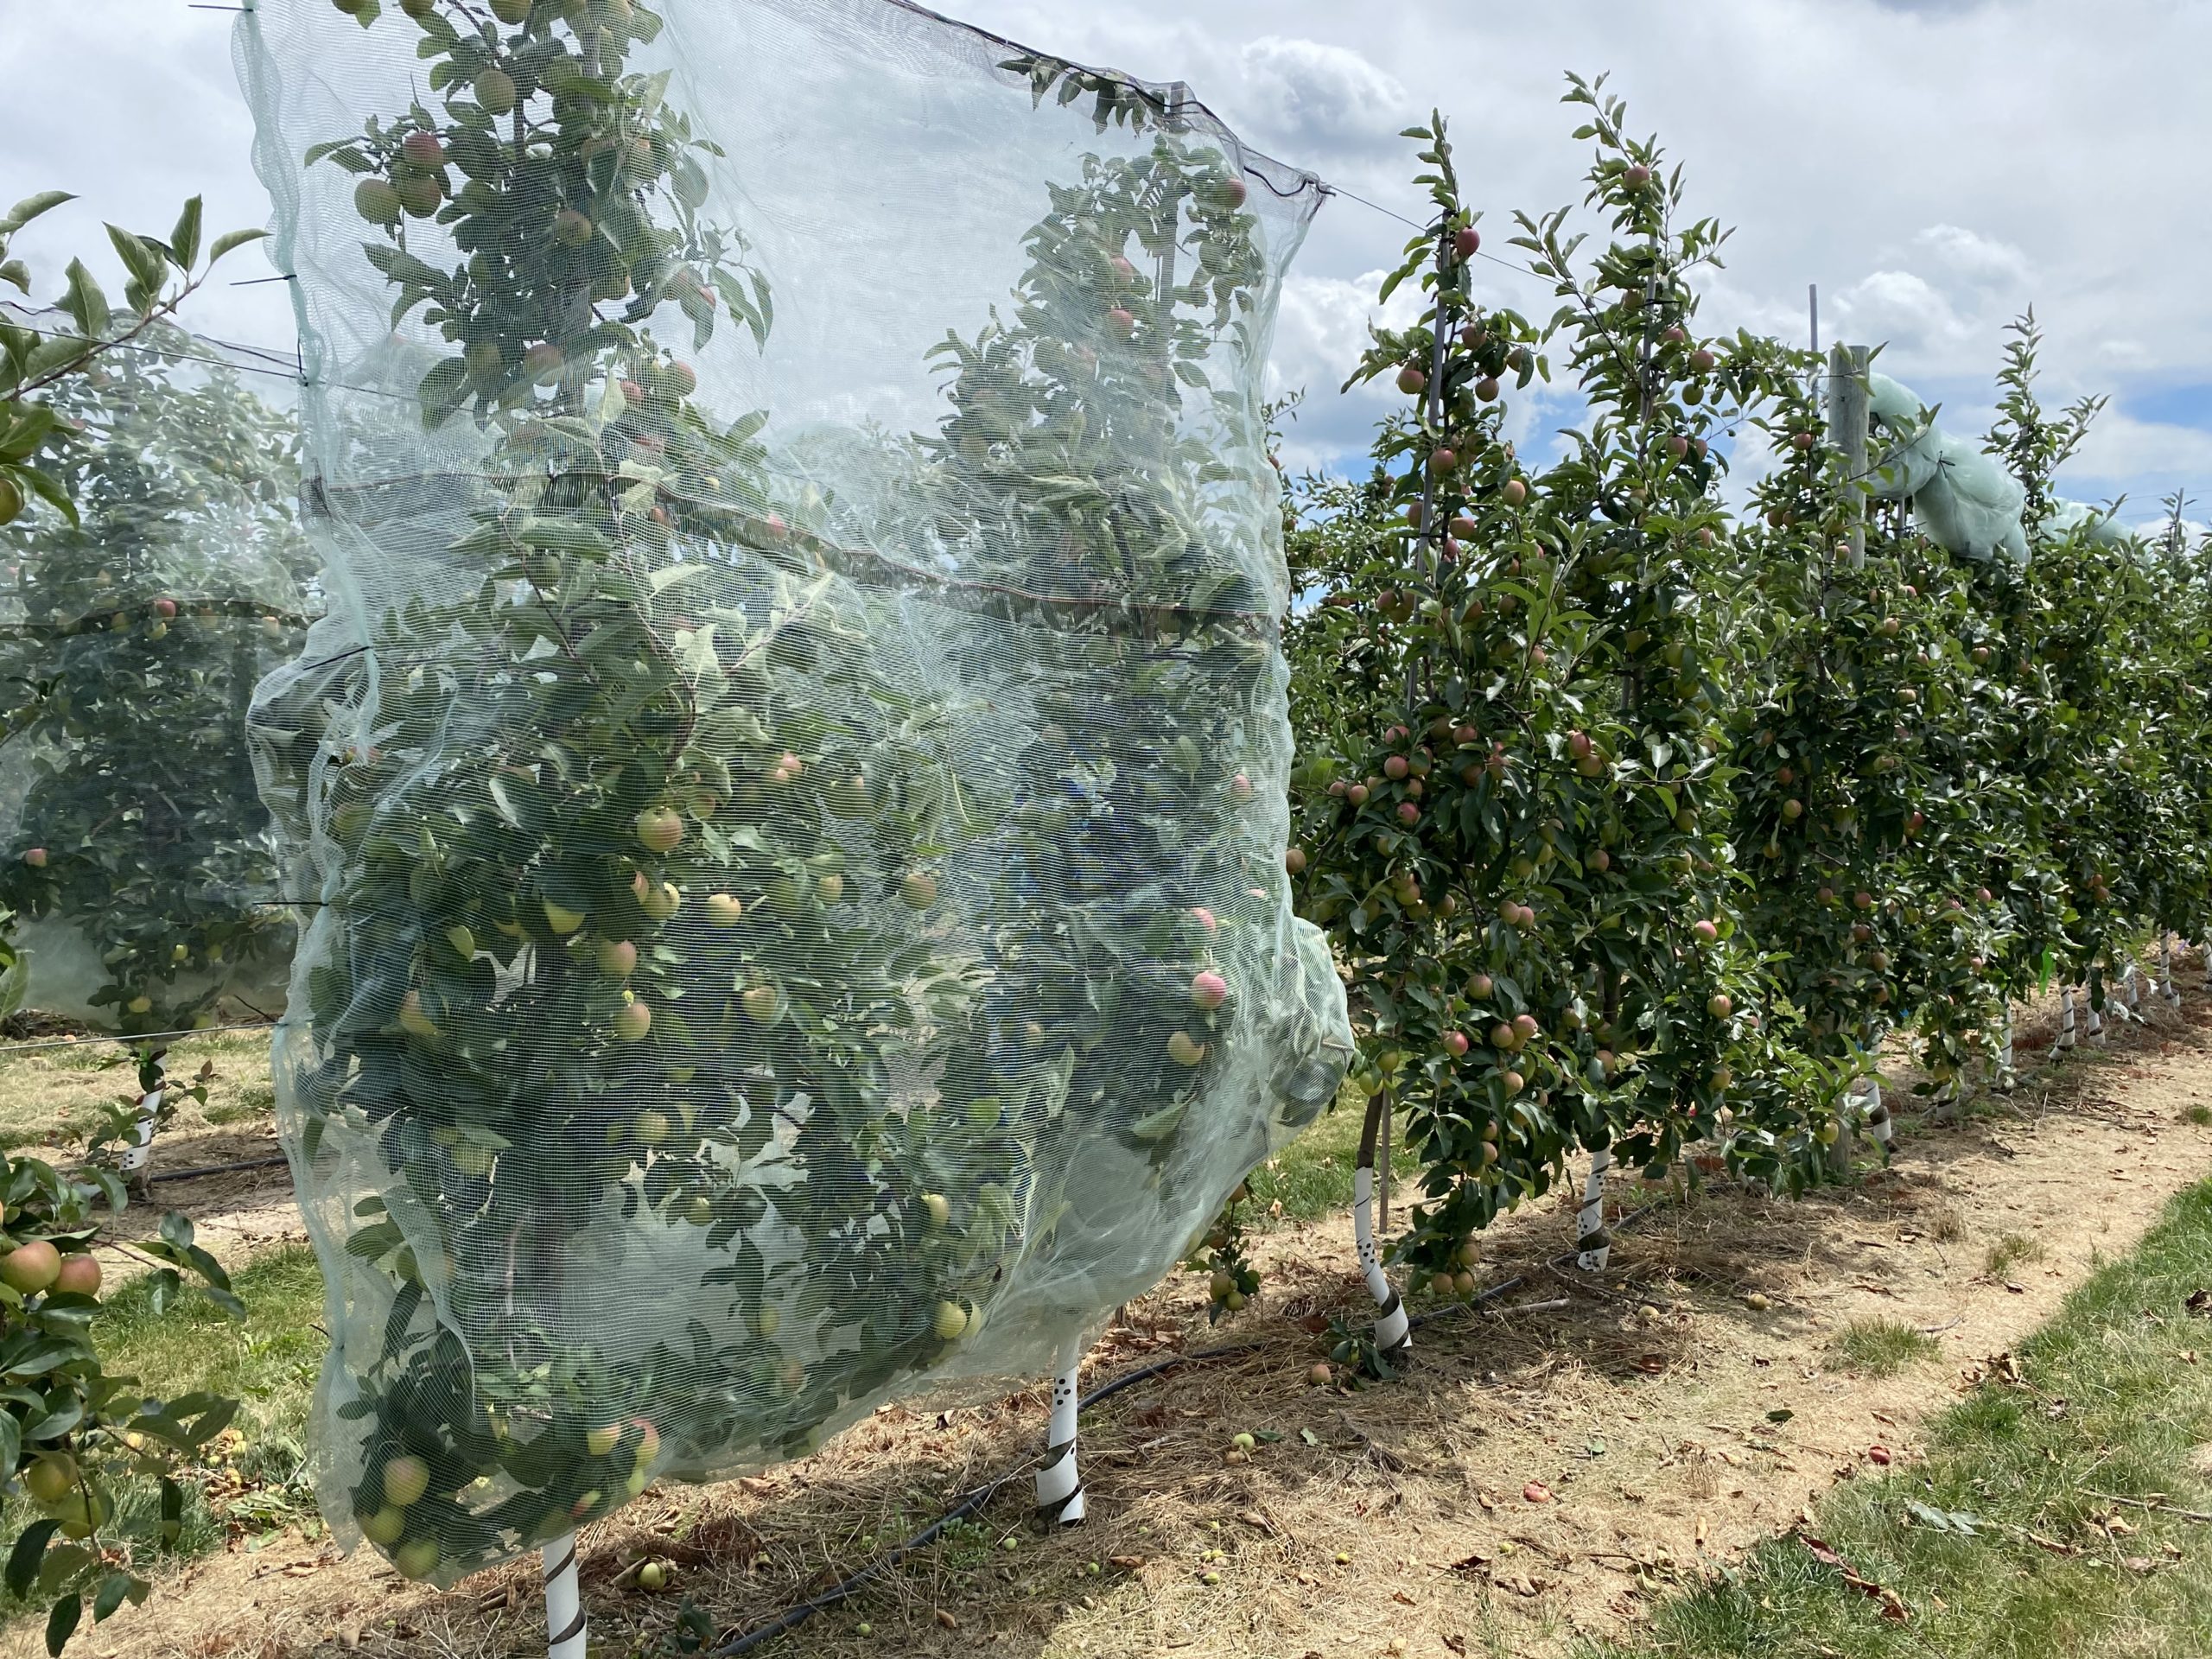 Netting on fruit trees curbs thinning needs - Fruit Growers News